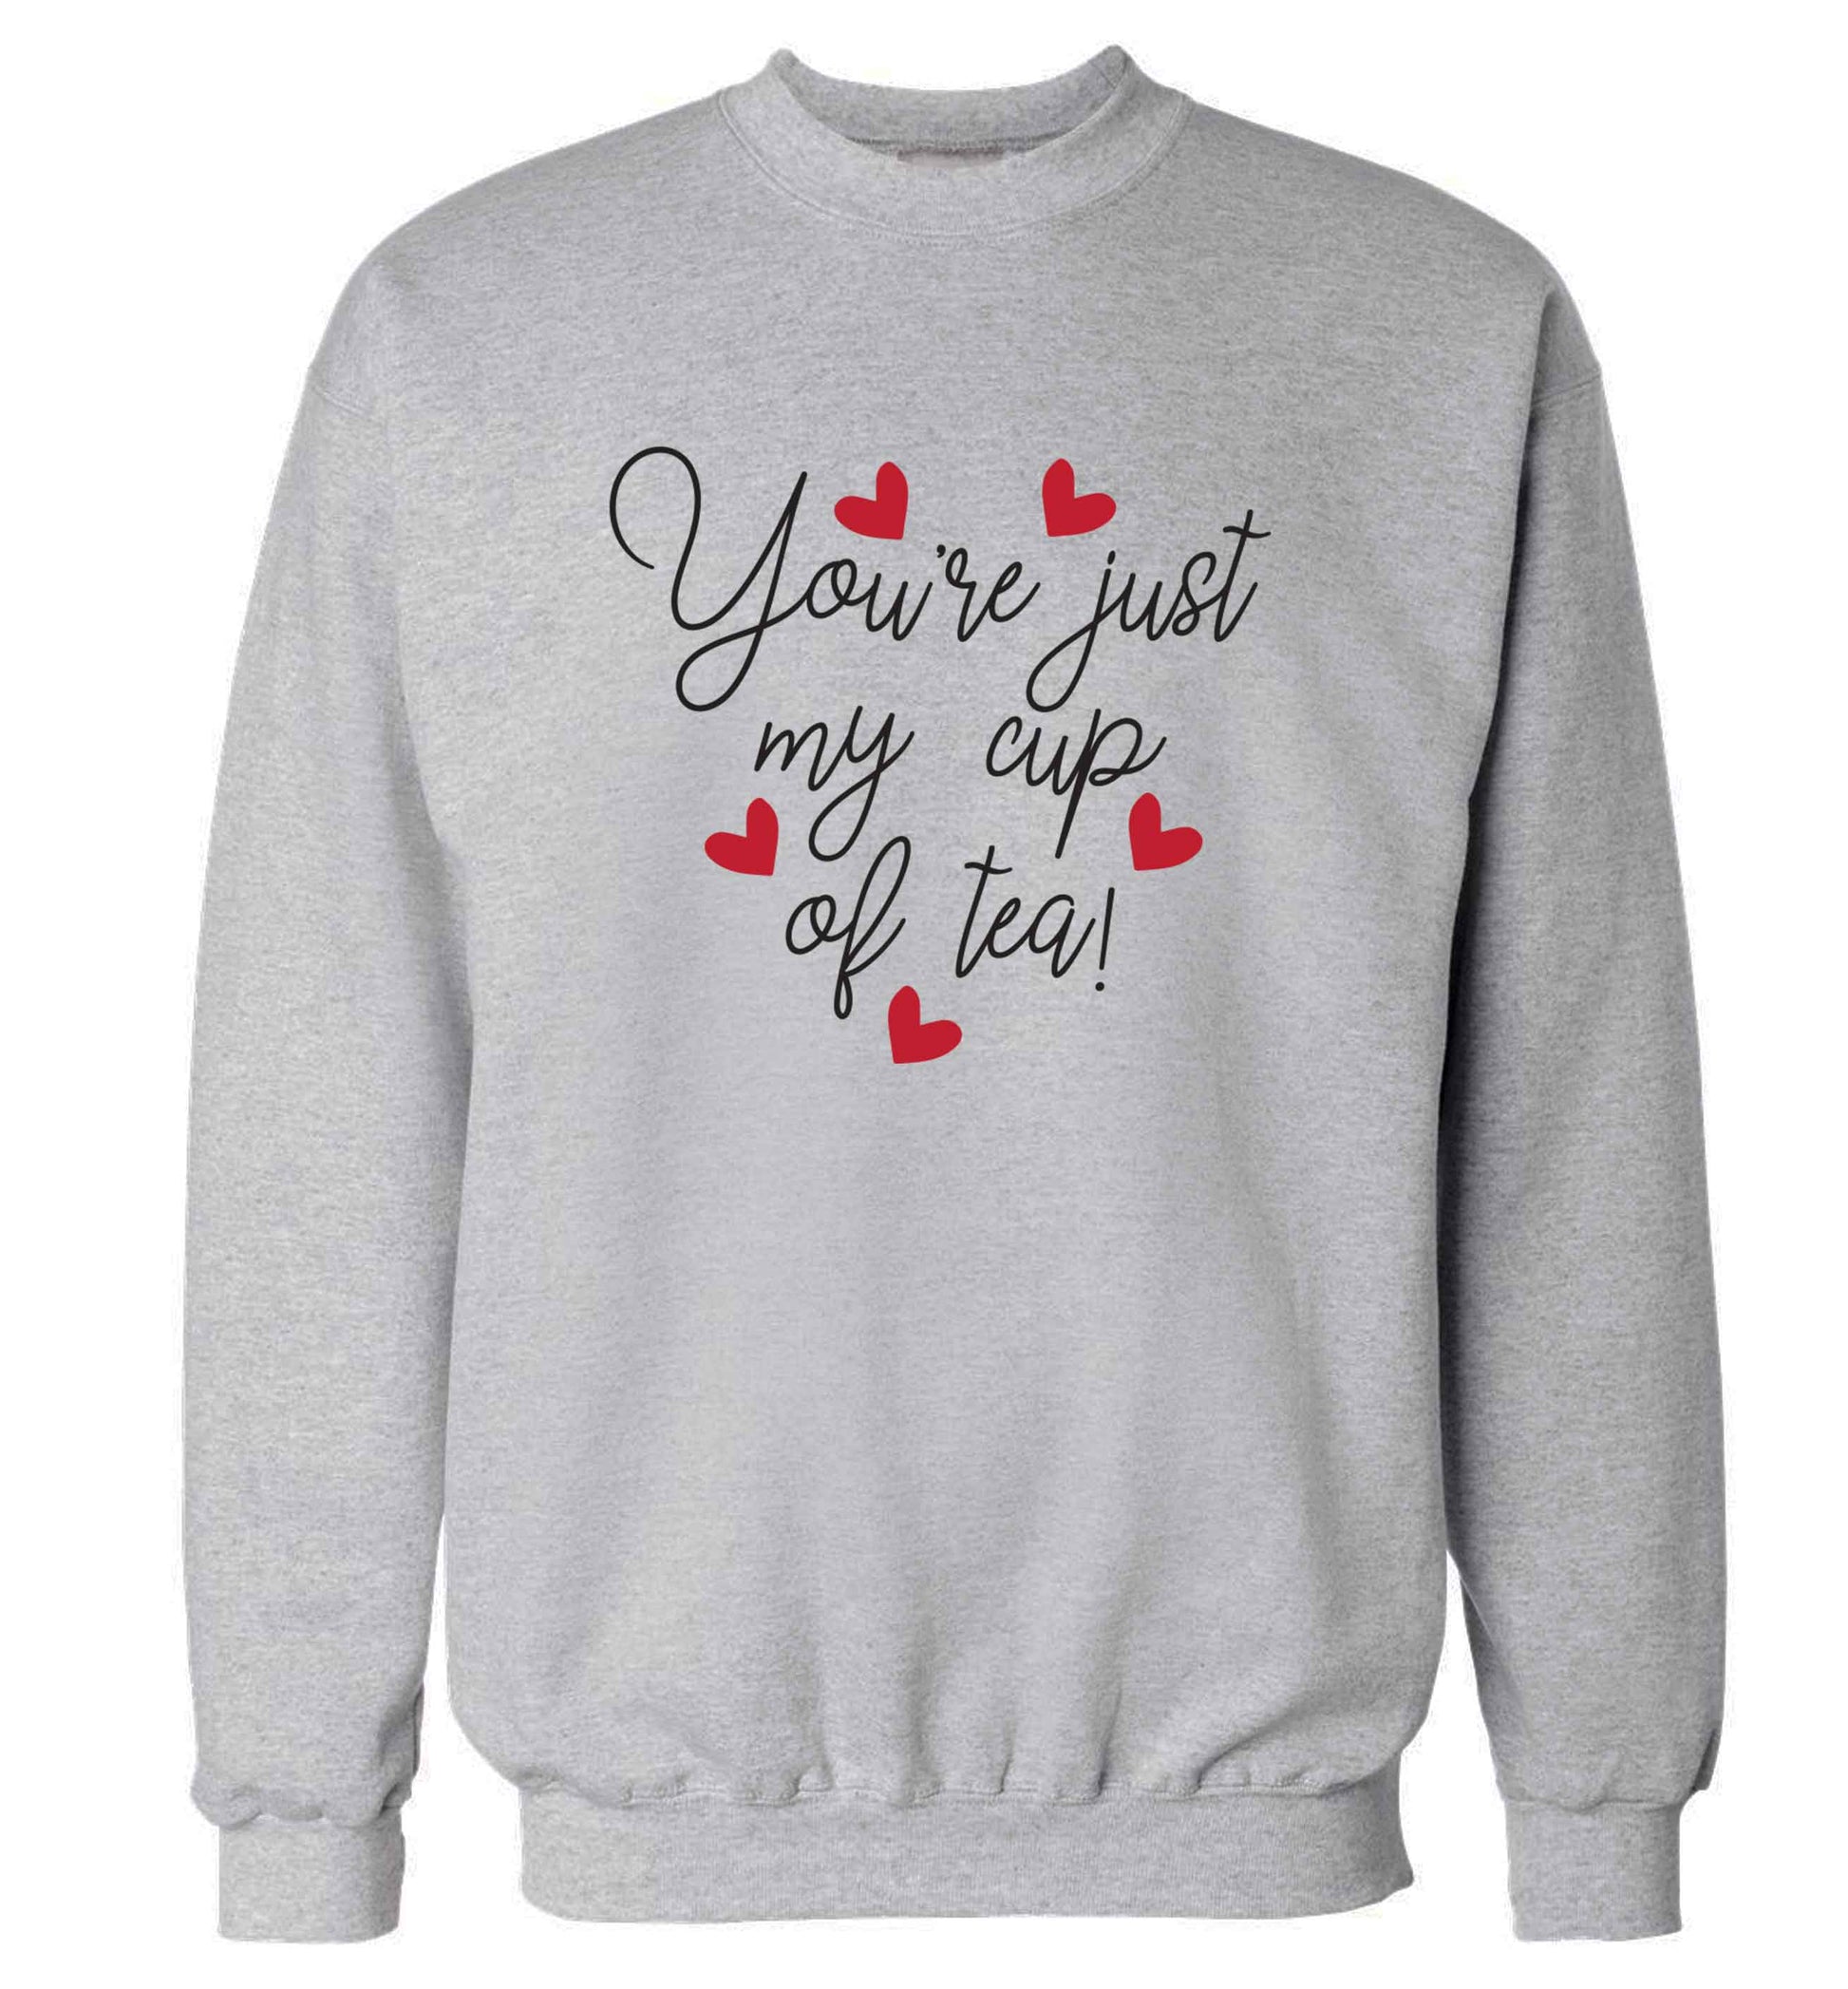 You're just my cup of tea adult's unisex grey sweater 2XL